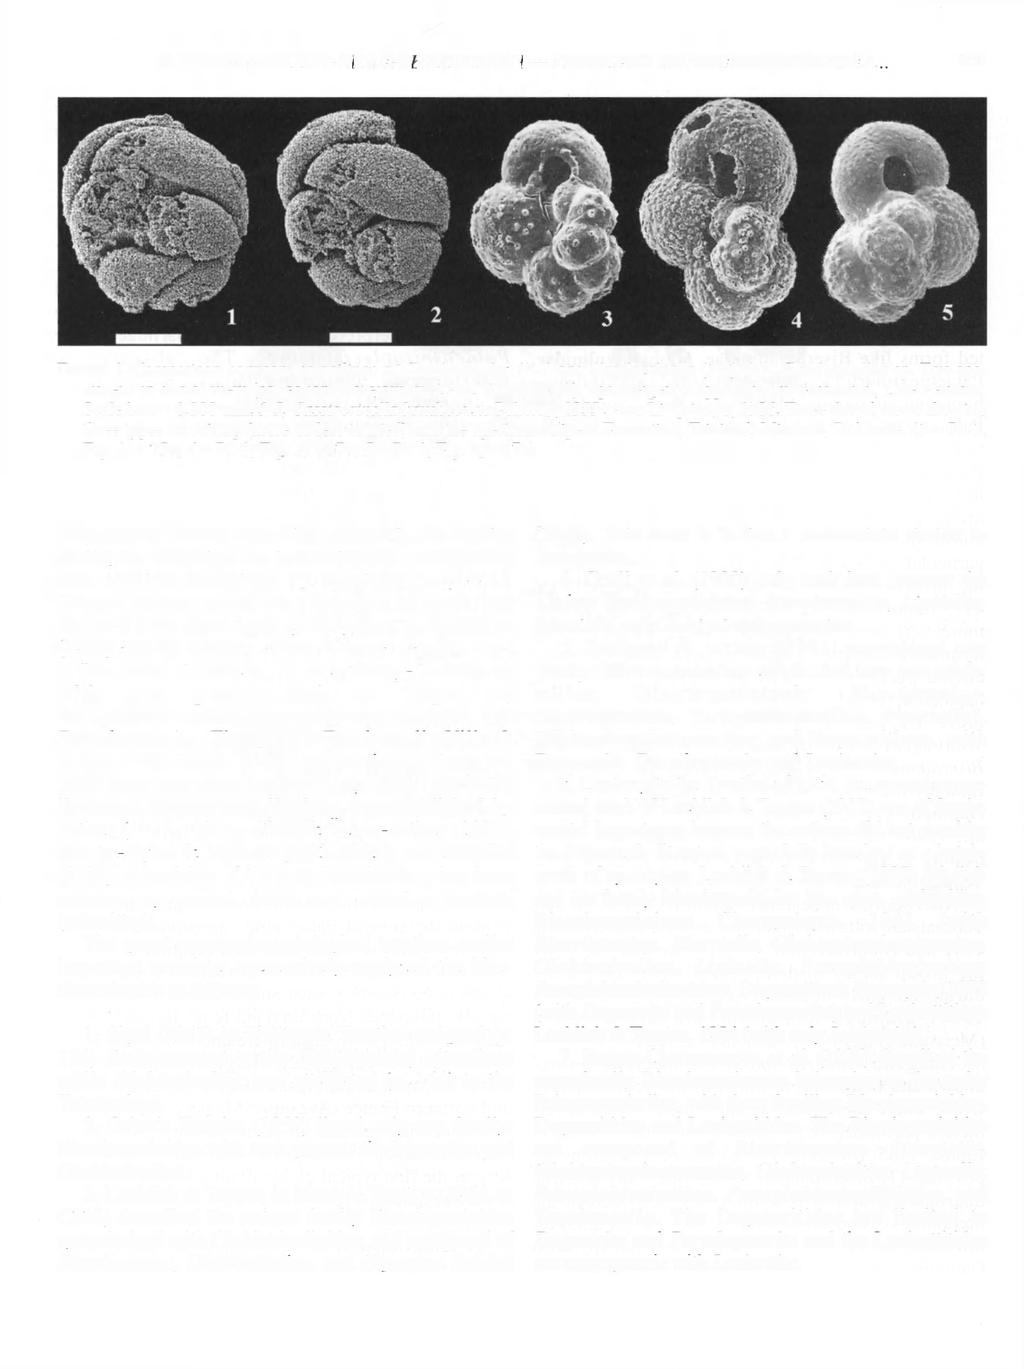 VACHARD-GAILLOT-PILLE-BEAZEJOWSKI PROBLEMS ON BISERIAMMINOIDEA... 455 FIGURE 1-Comparison between the coilings of Globivalvulina (1-2) and Cassigerinella (3-5). 1-2, Globivalvulina sp.